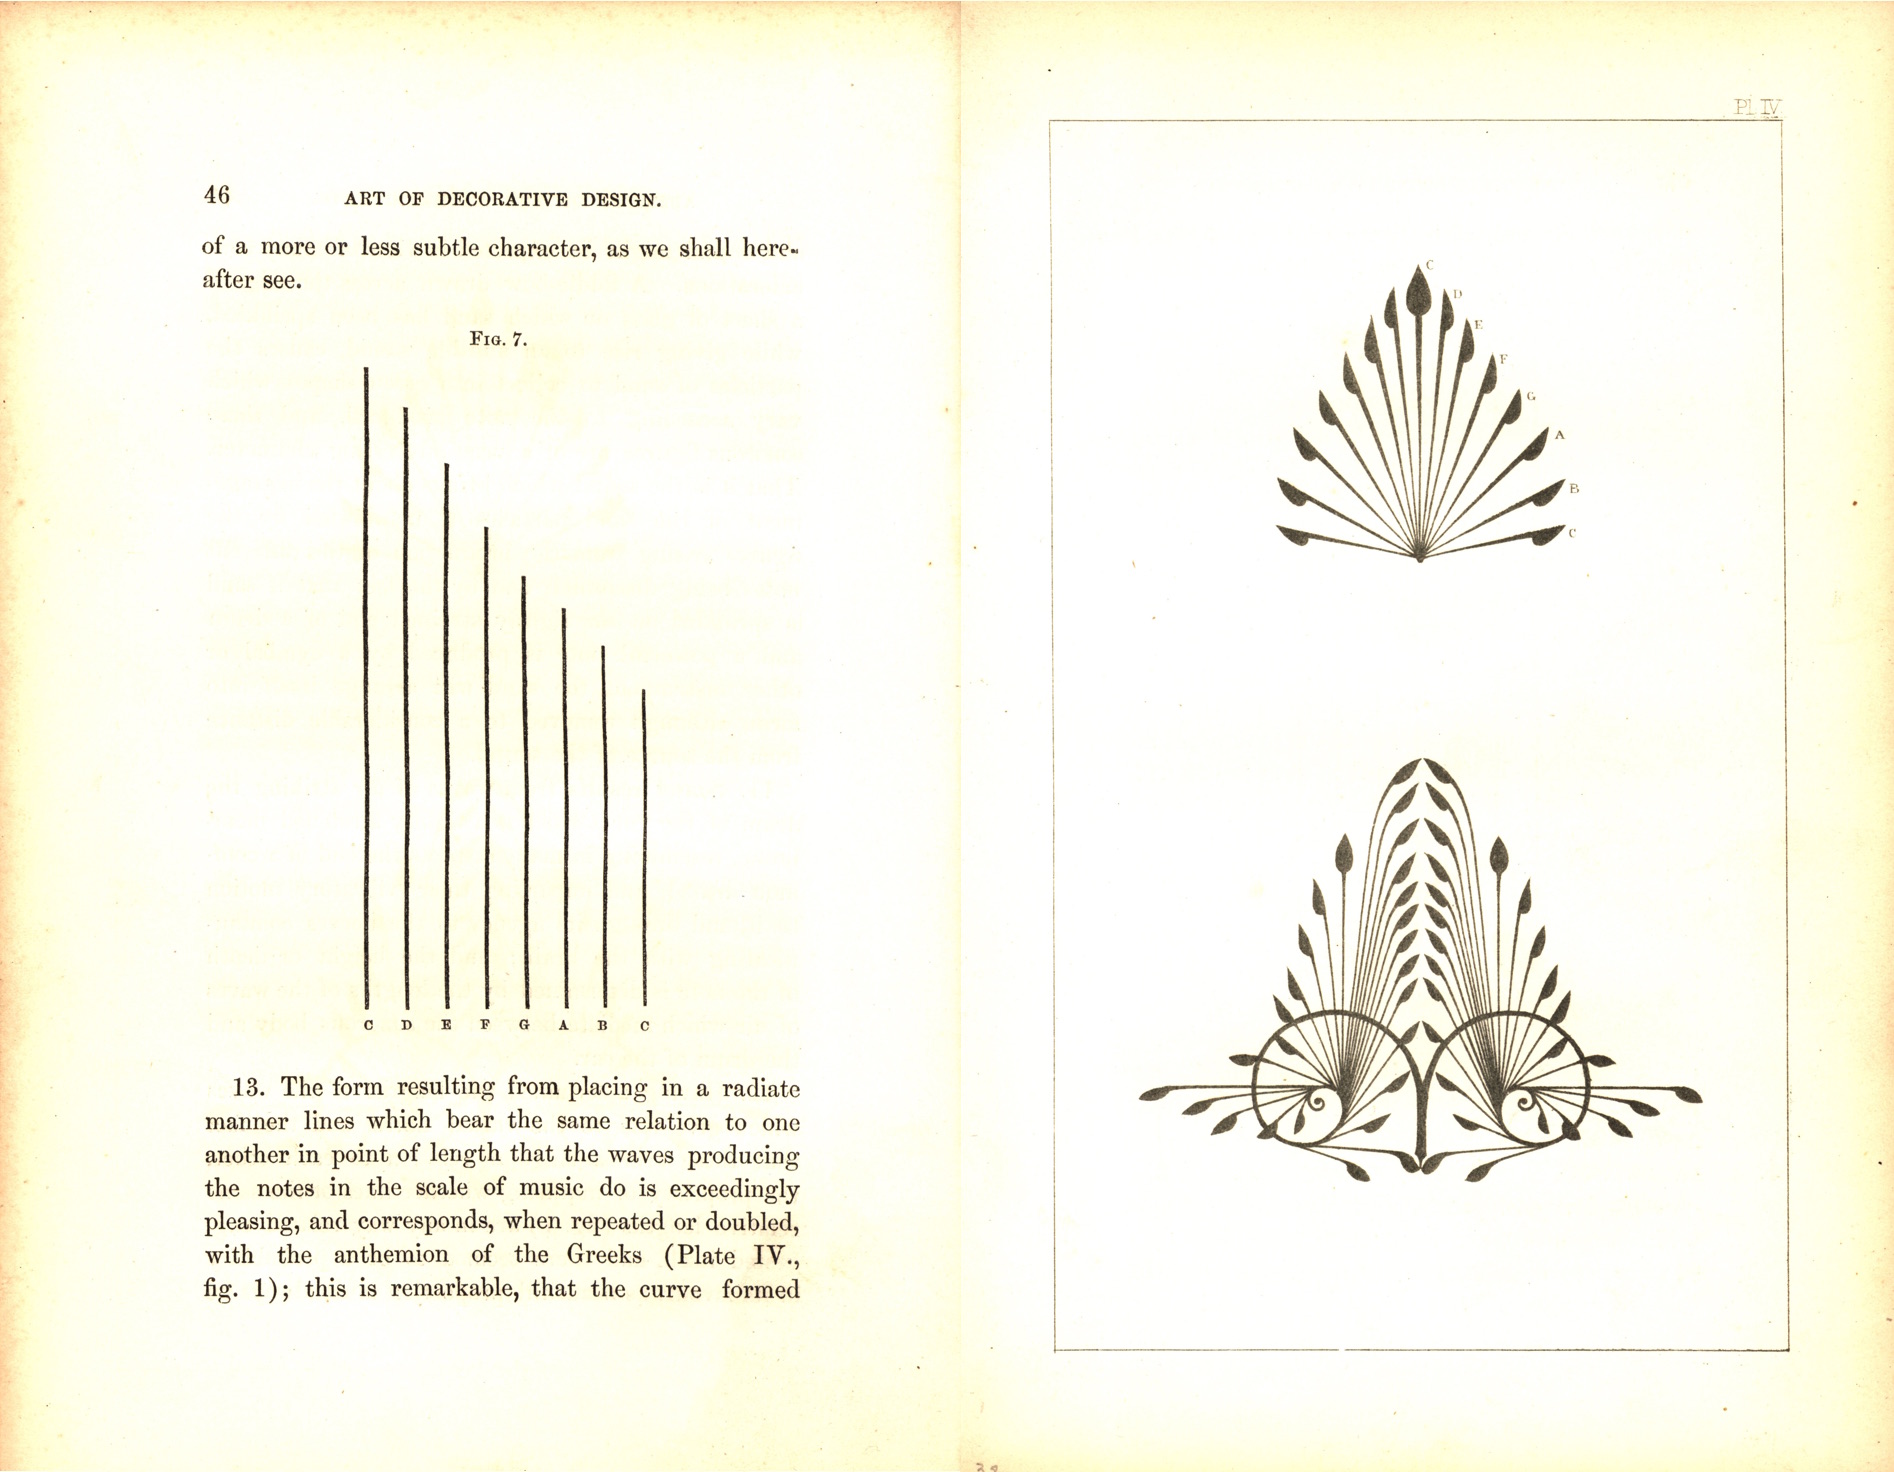 Figure 2. Dresser’s illustration of the formal similarity between the musical scale and the Greek anthemion motif. From _The Art of Decorative Design_. Courtesy of the Department of Special Collections, Stanford University Libraries.